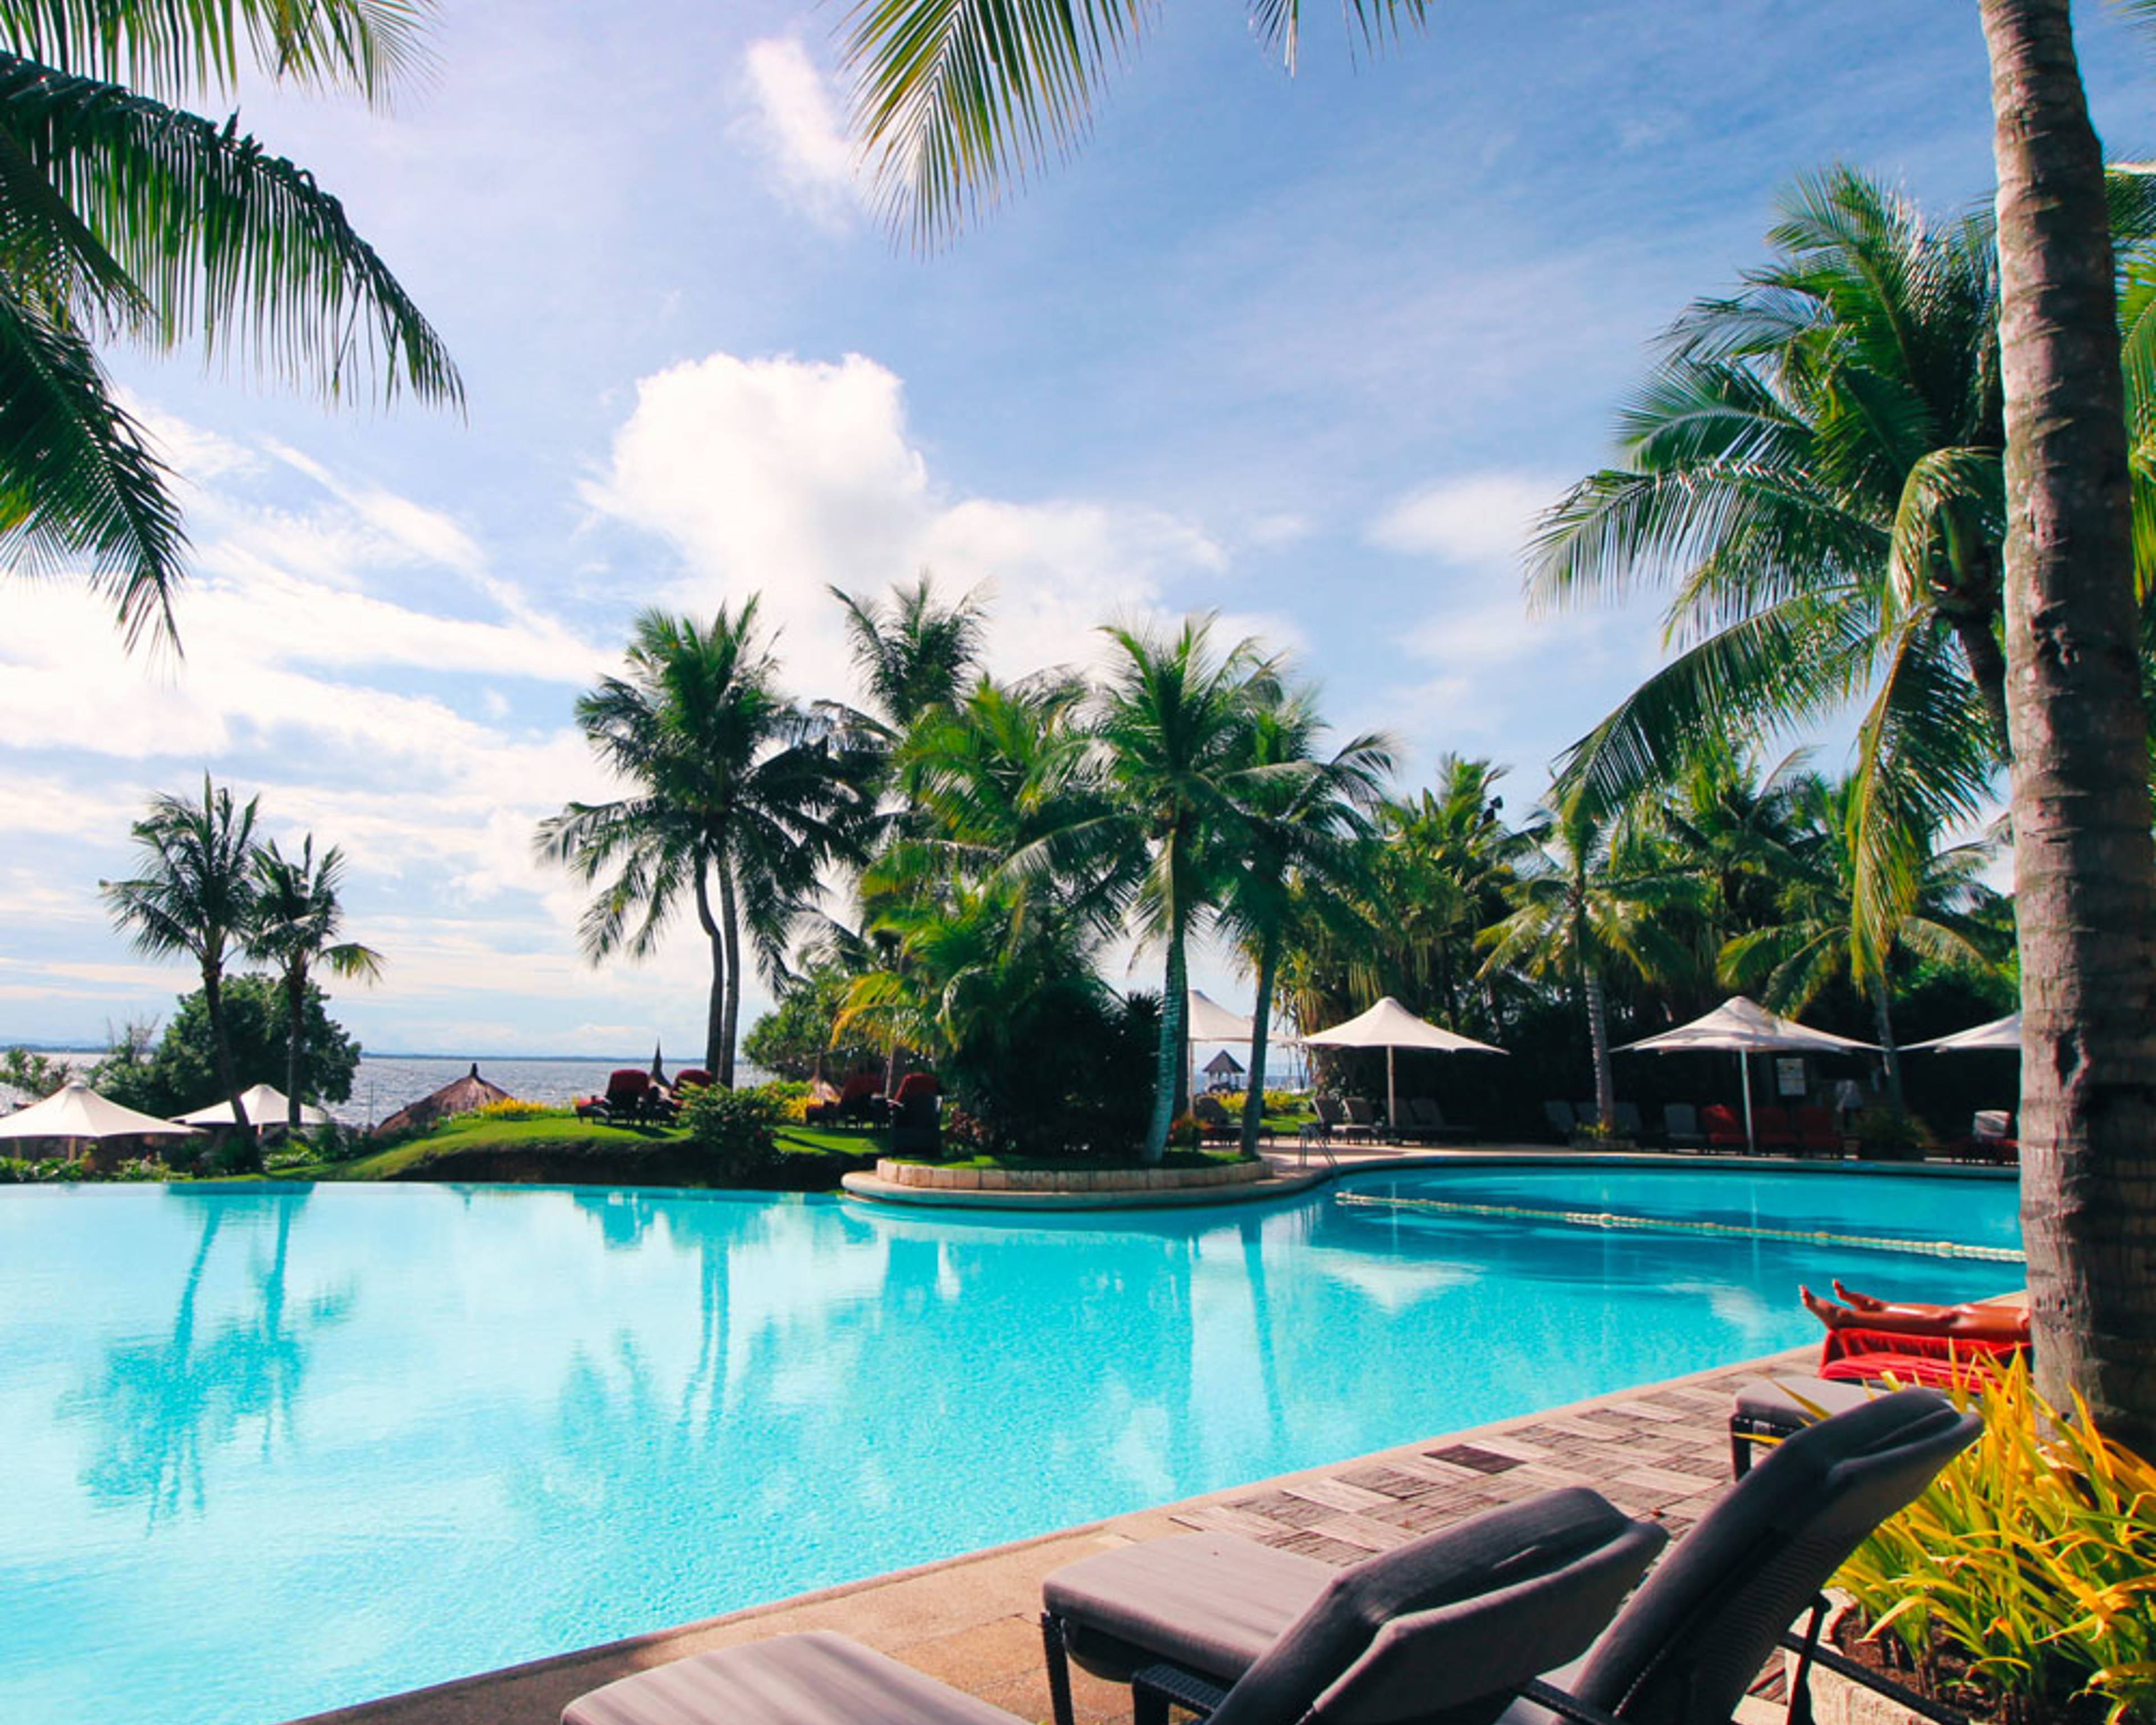 Design your perfect luxury vacation with a local expert in the Philippines